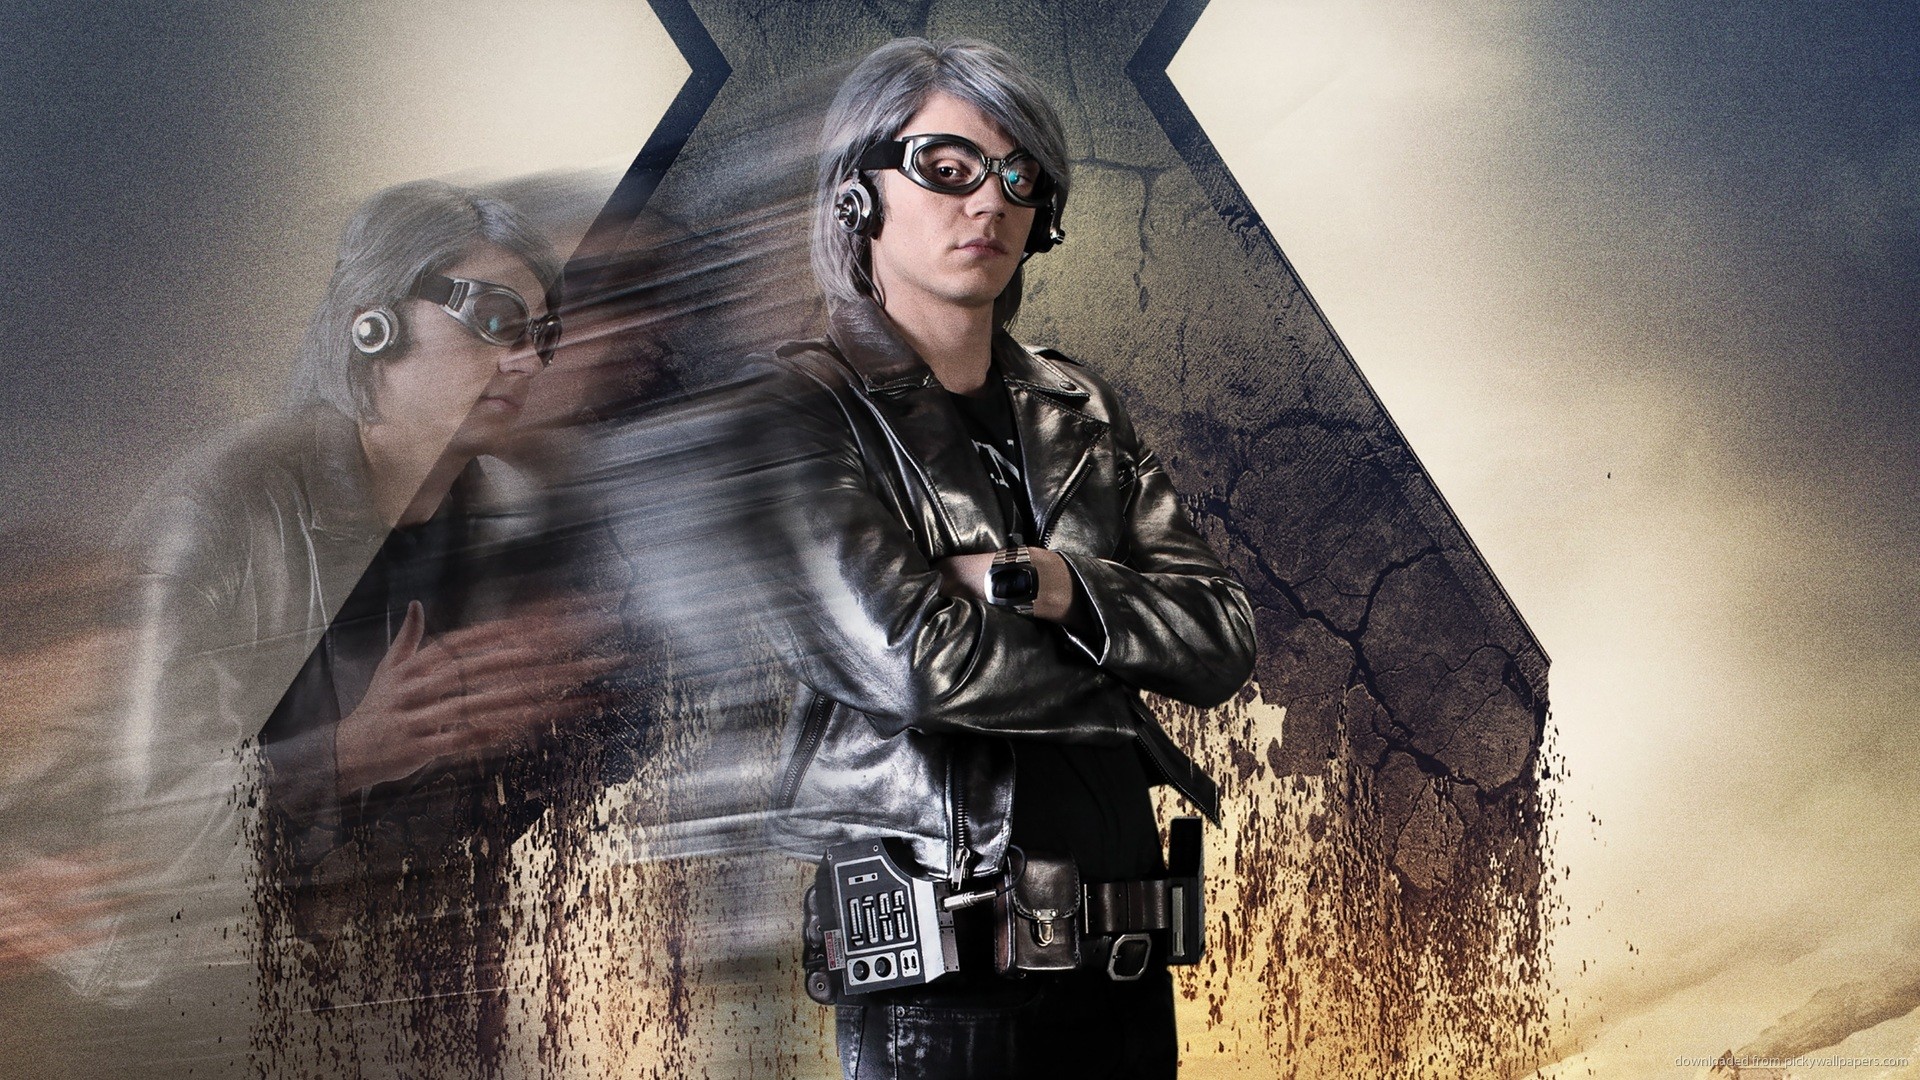 Quicksilver Wallpapers (59+ images)